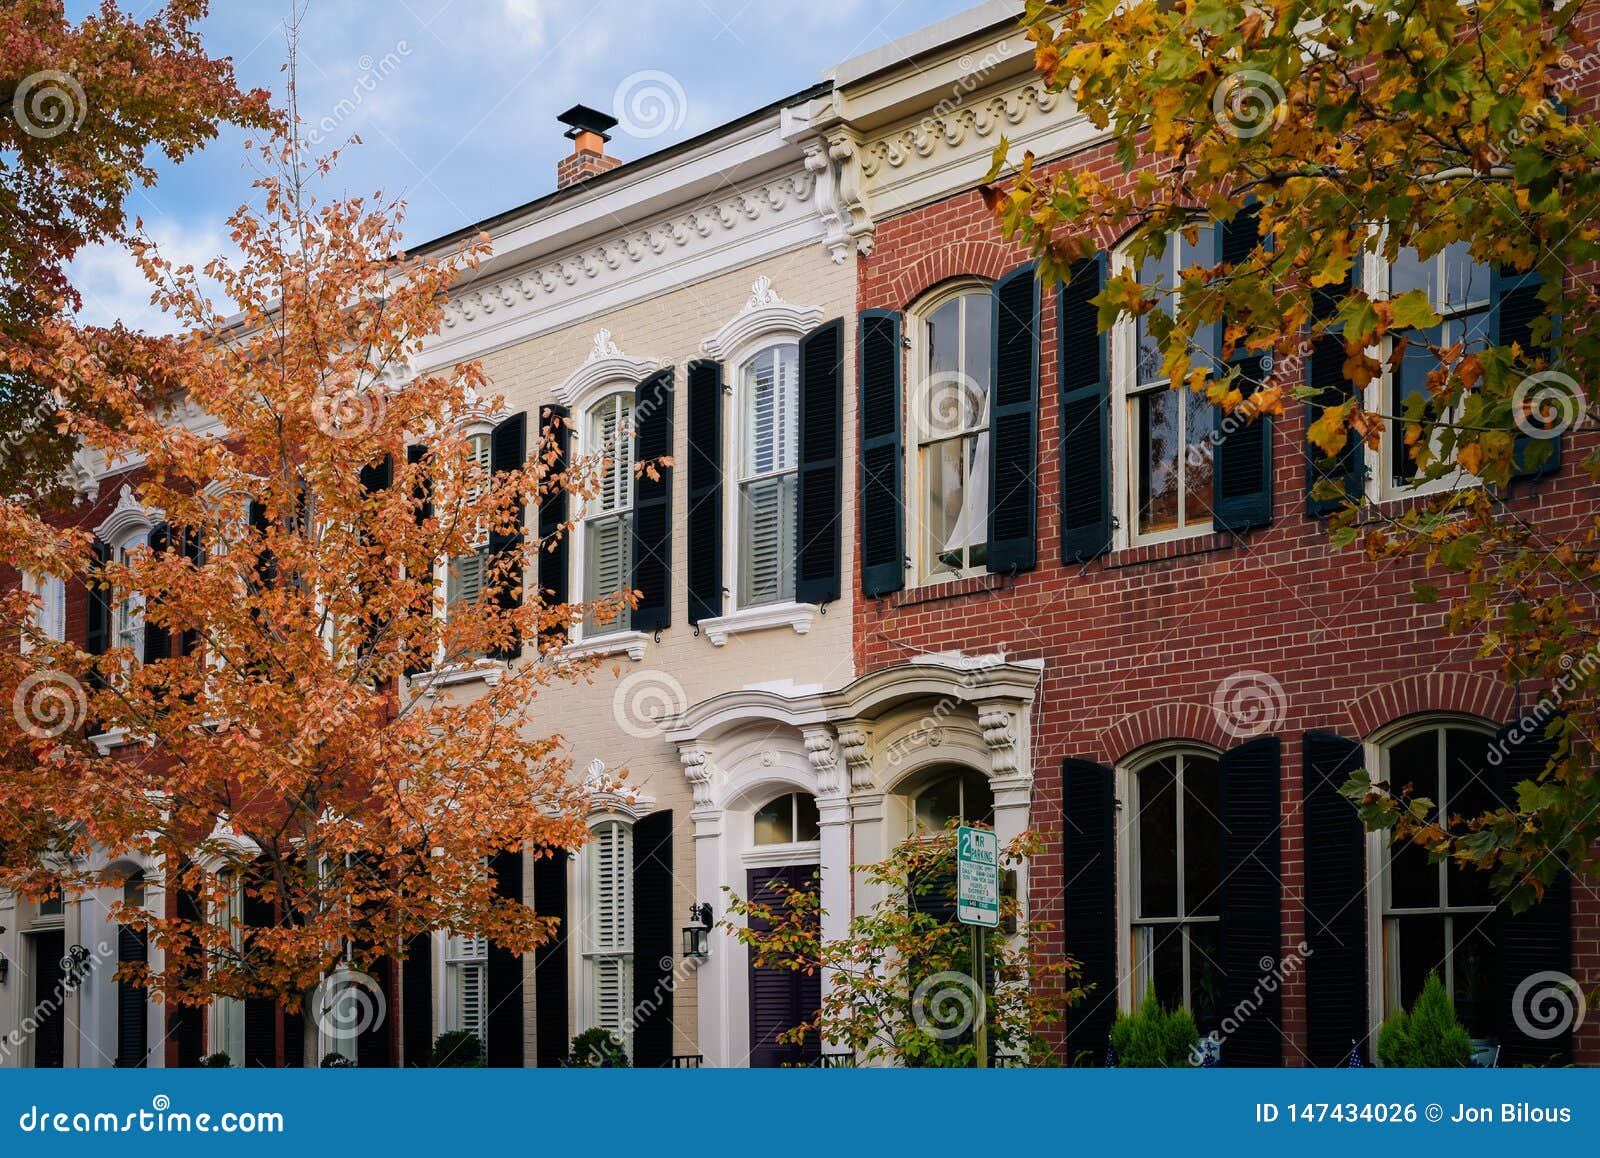 fall color and row houses in old town, alexandria, virginia